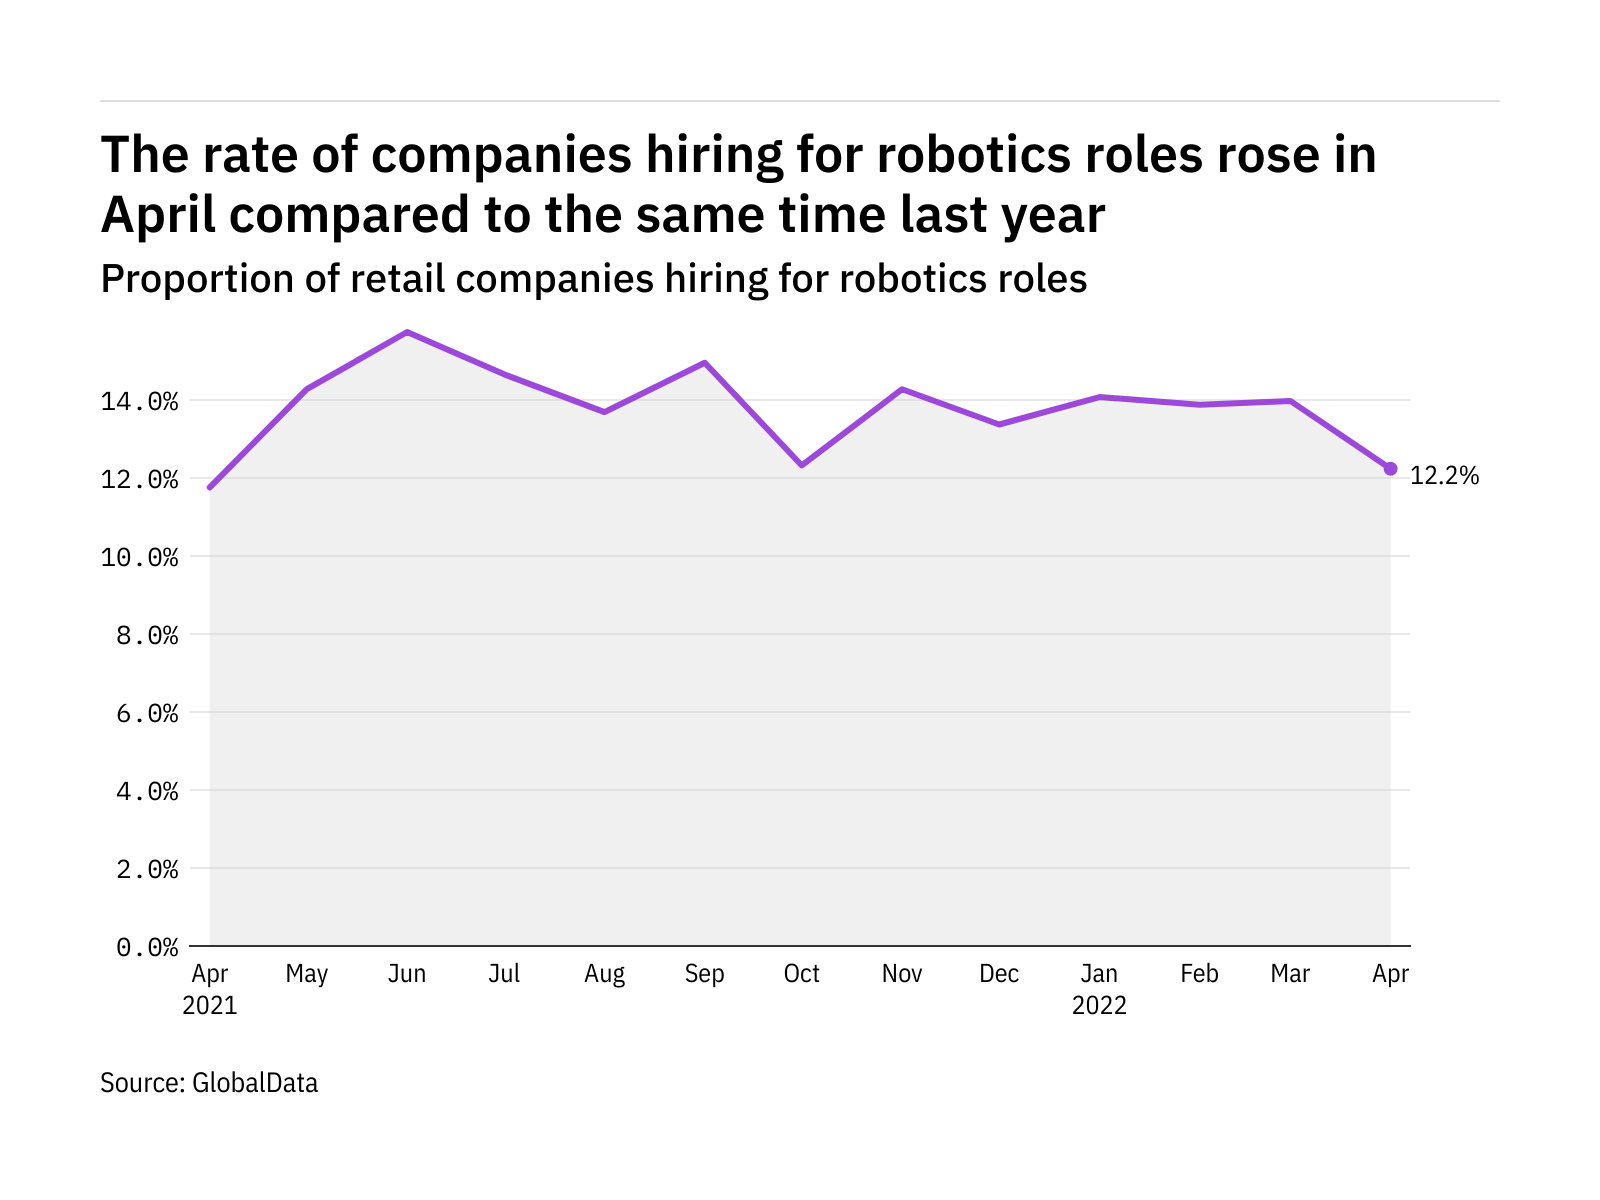 Robotics hiring levels in the retail industry rose in April 2022